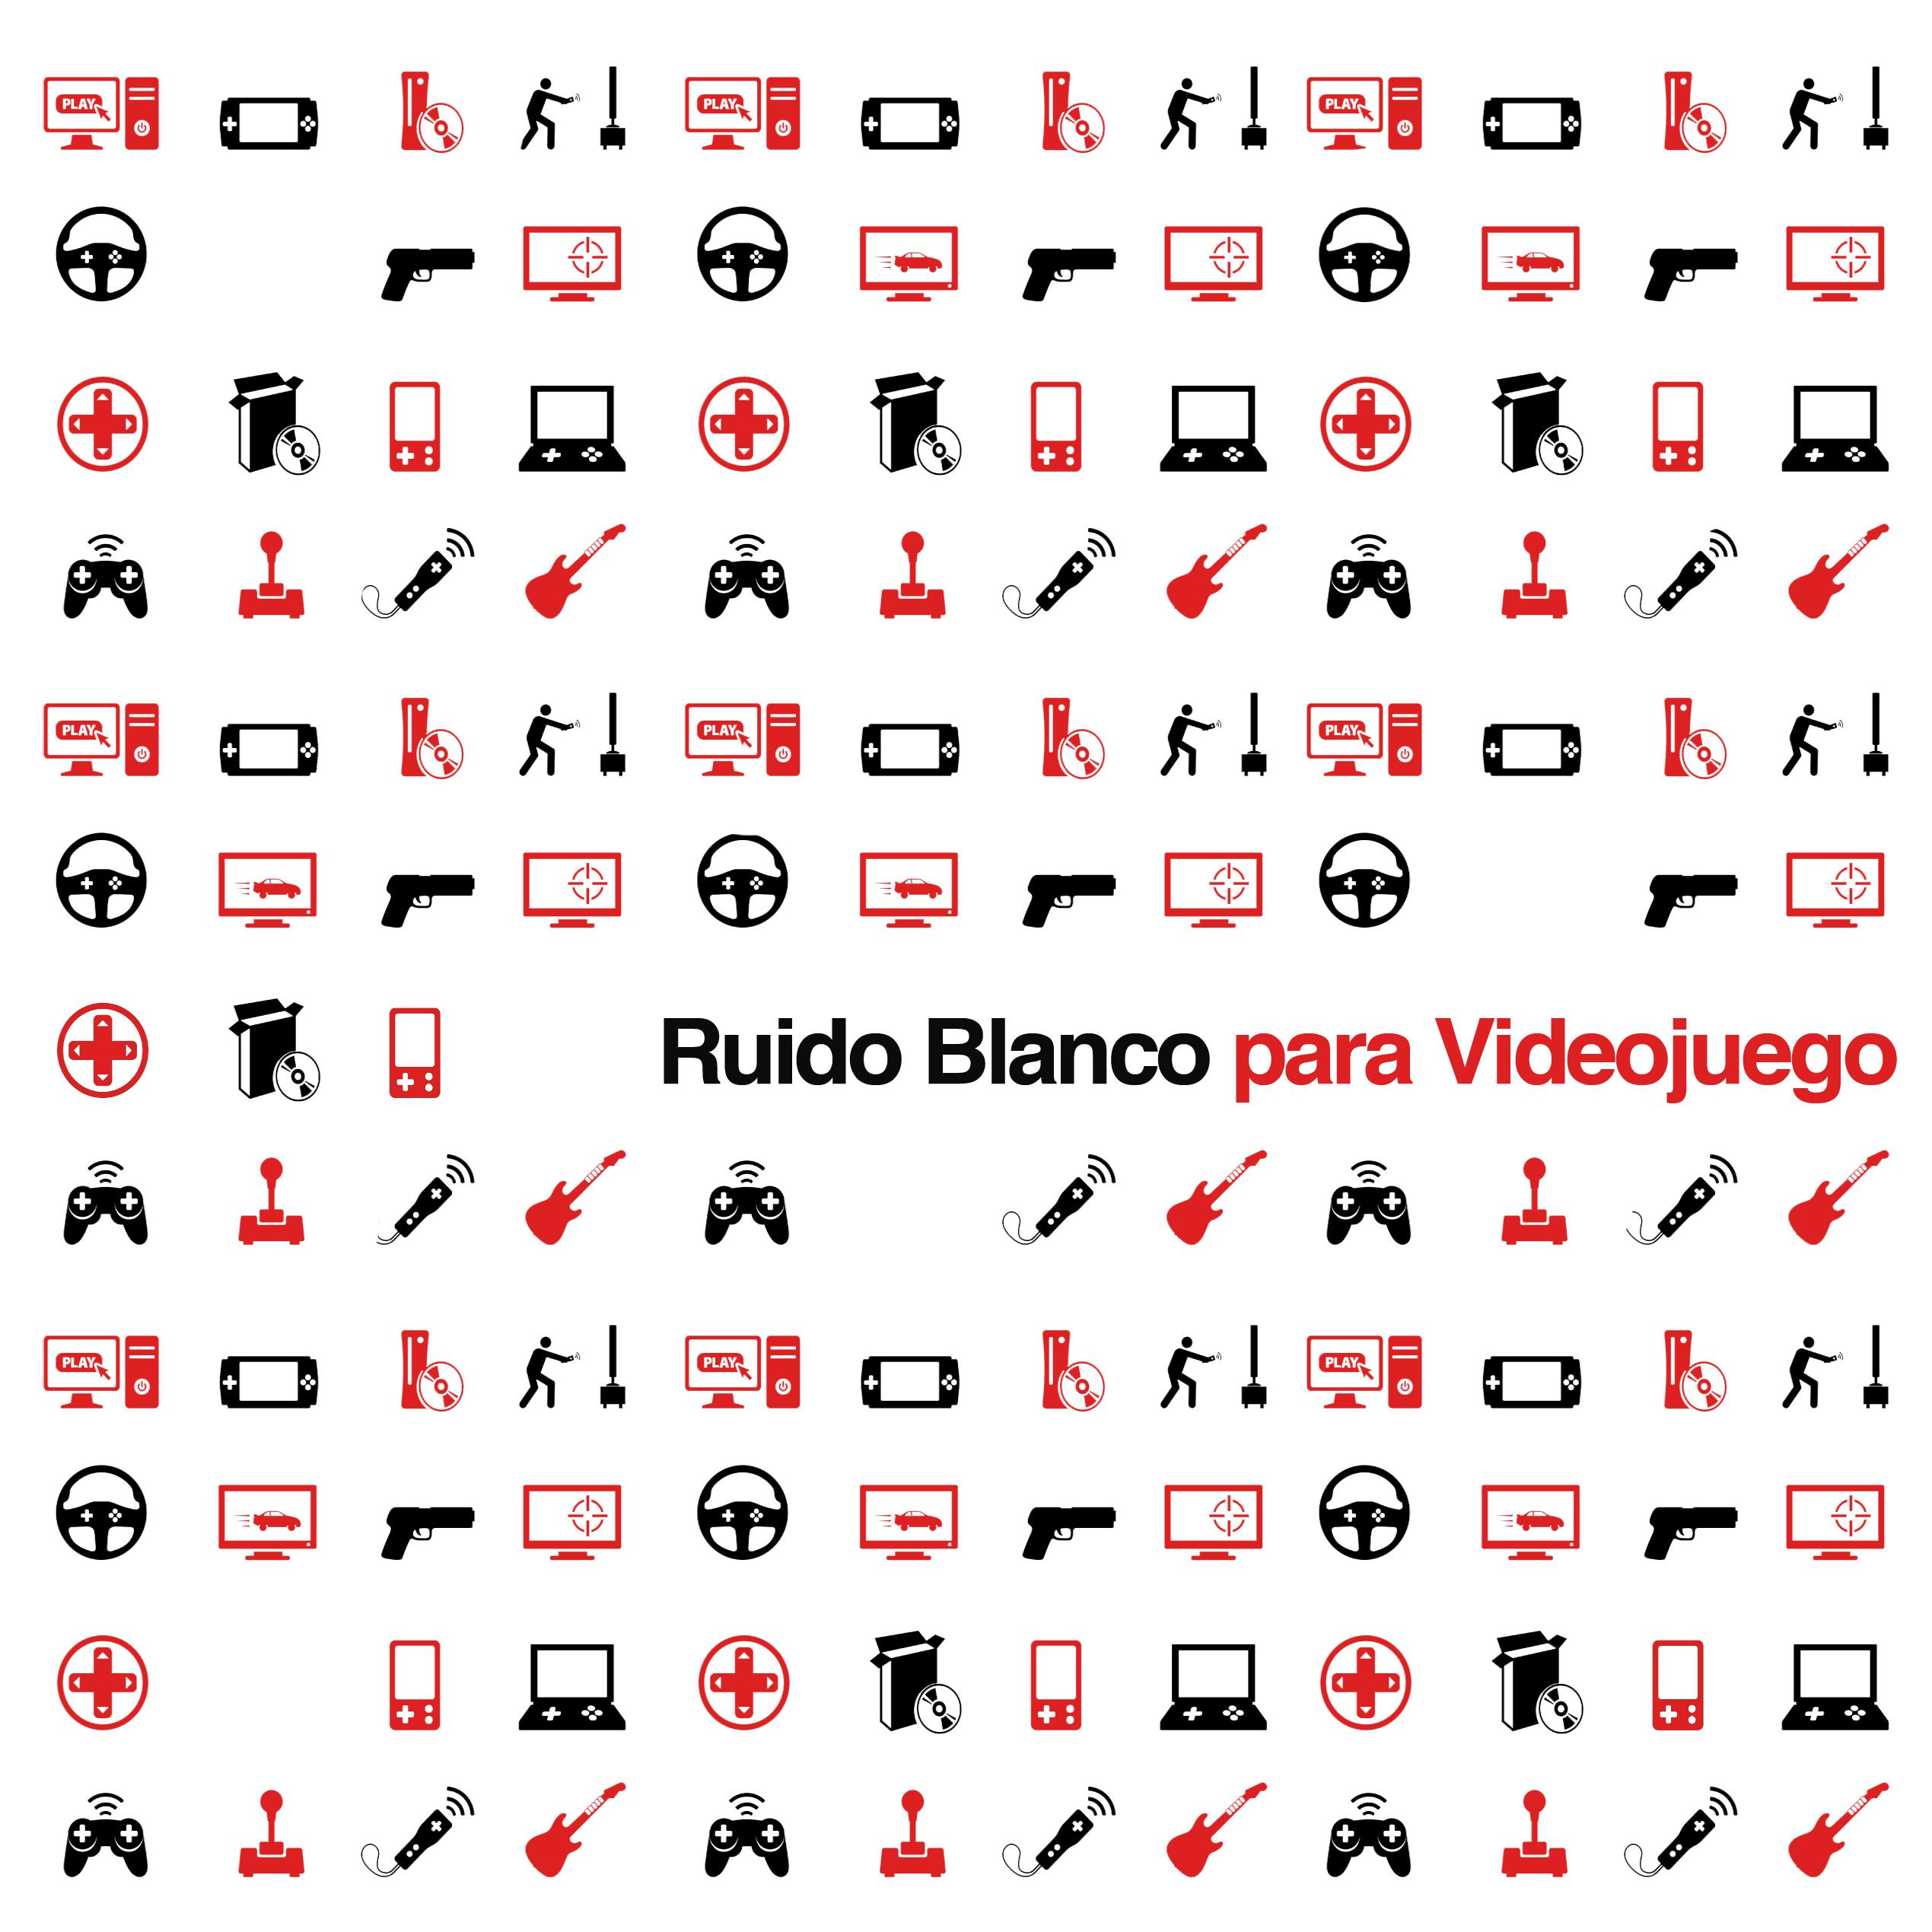 Ruido Blanco Puro (White Noise for One Hour With One Minute Fade Out)